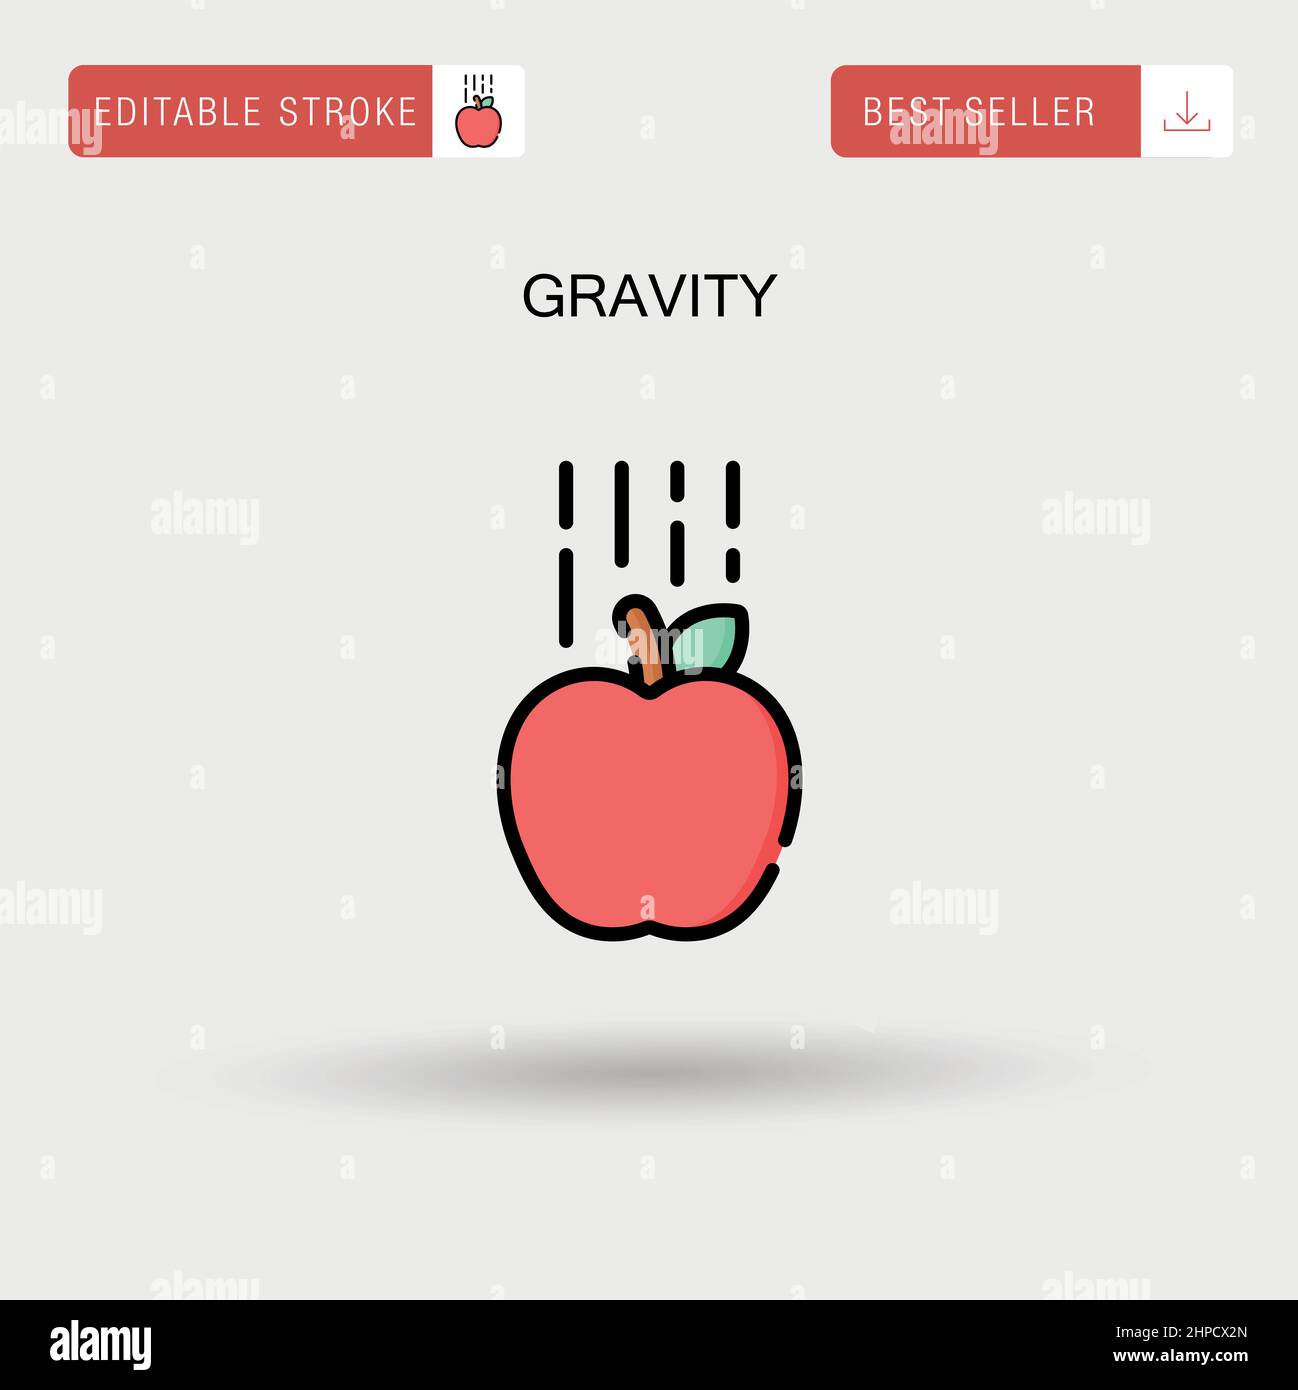 gravity pictures